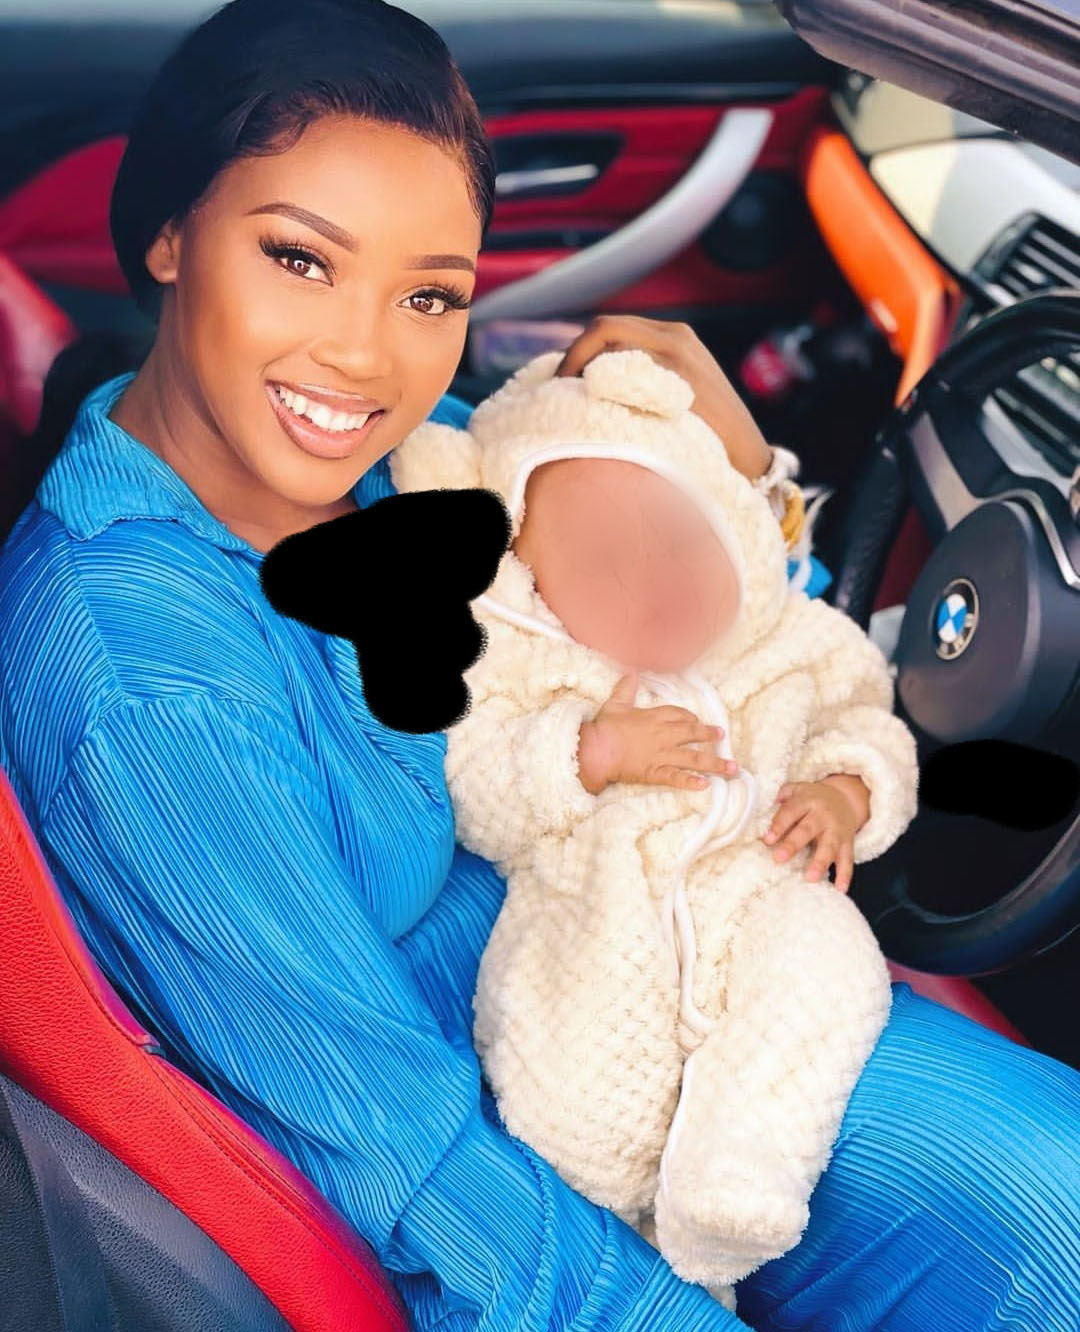 Durban Gen actress Faith Sibiya stunned Mzansi with a picture holding a baby "I miss my baby" 1